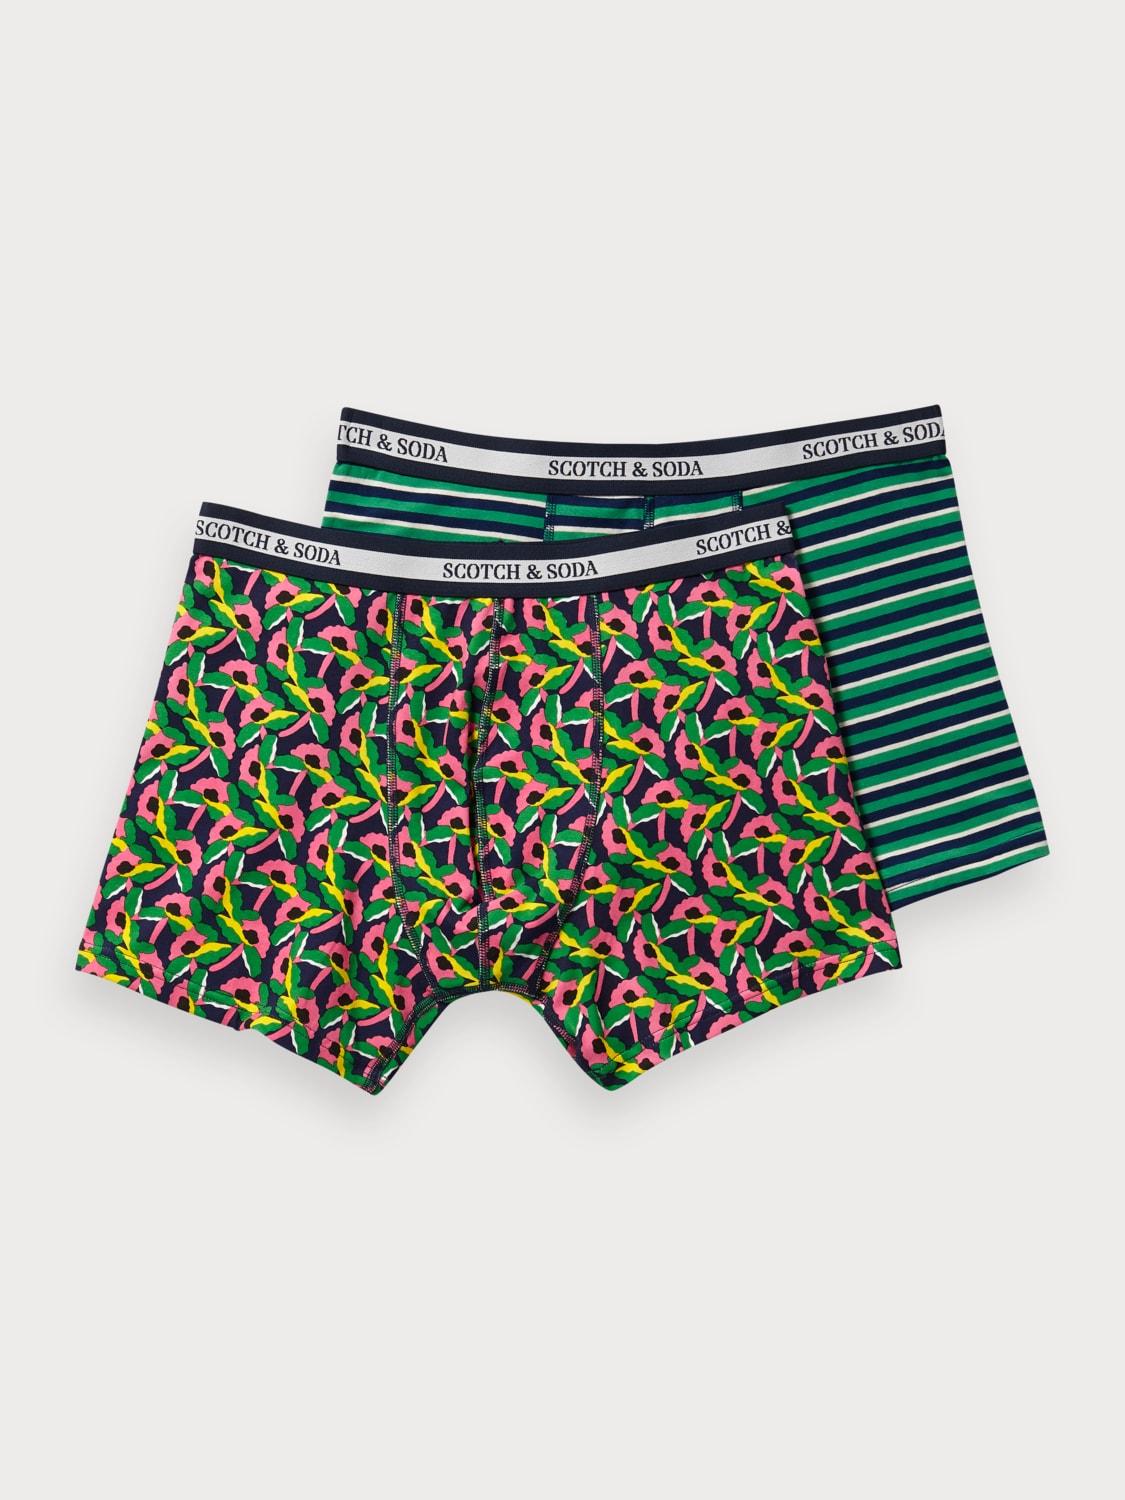 Scotch & Soda Cotton 2-pack All-over Printed Boxer Shorts for Men - Lyst